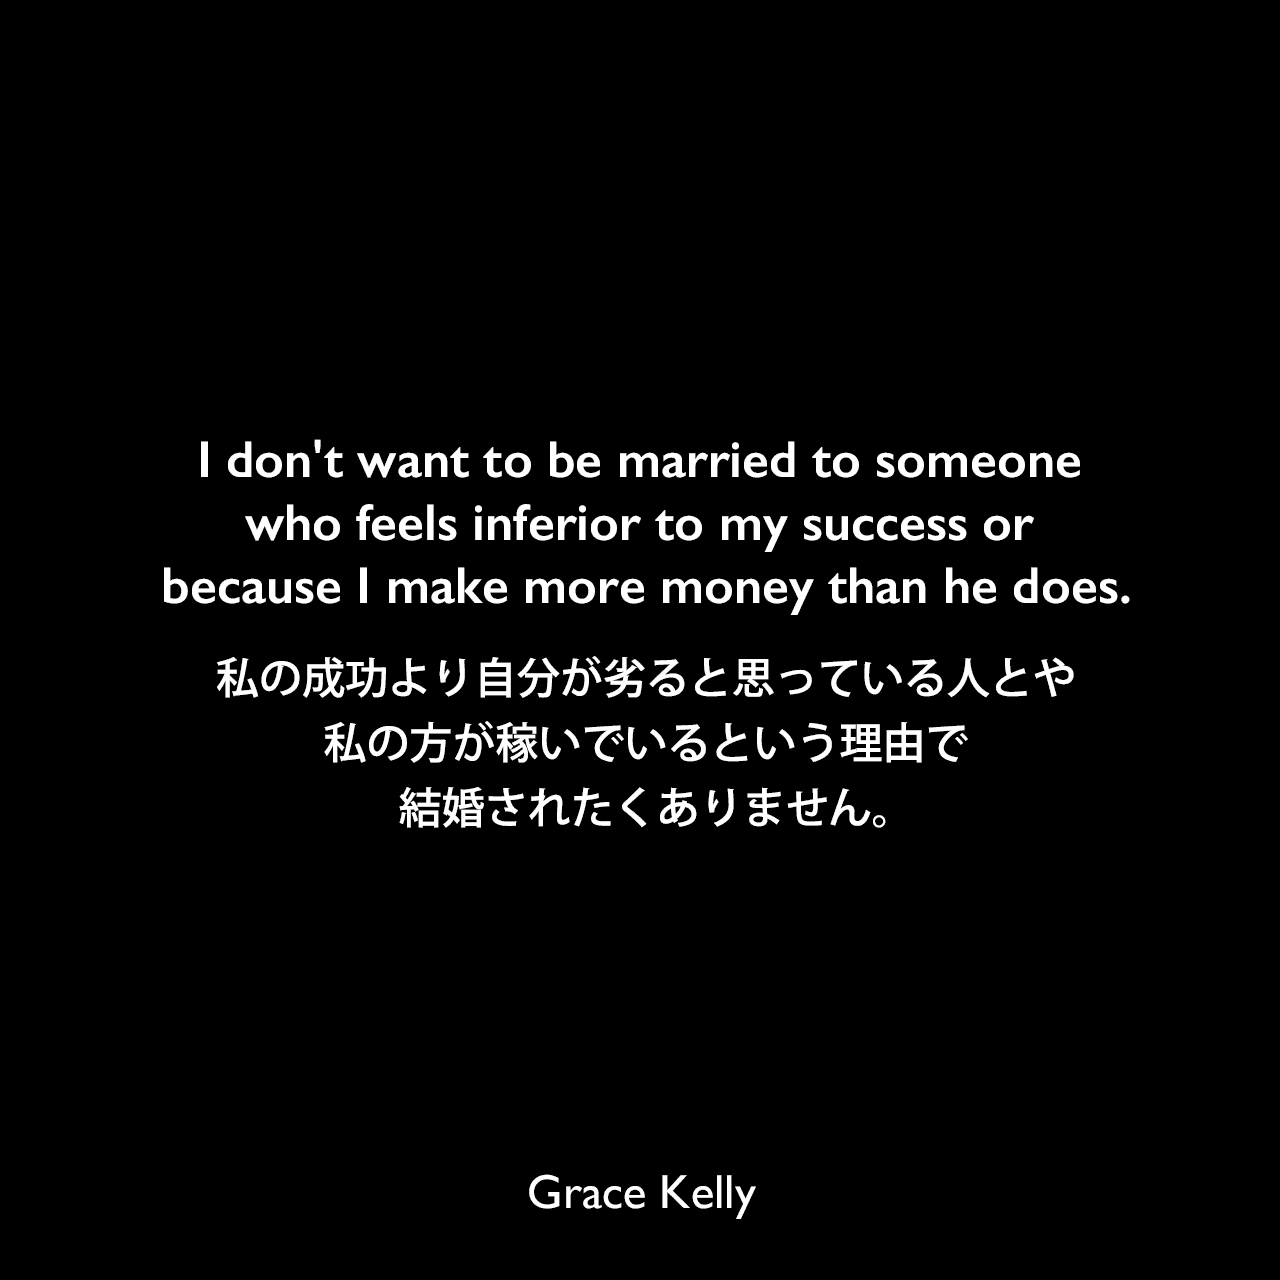 I don't want to be married to someone who feels inferior to my success or because I make more money than he does.私の成功より自分が劣ると思っている人とや、私の方が稼いでいるという理由で結婚されたくありません。Grace Kelly